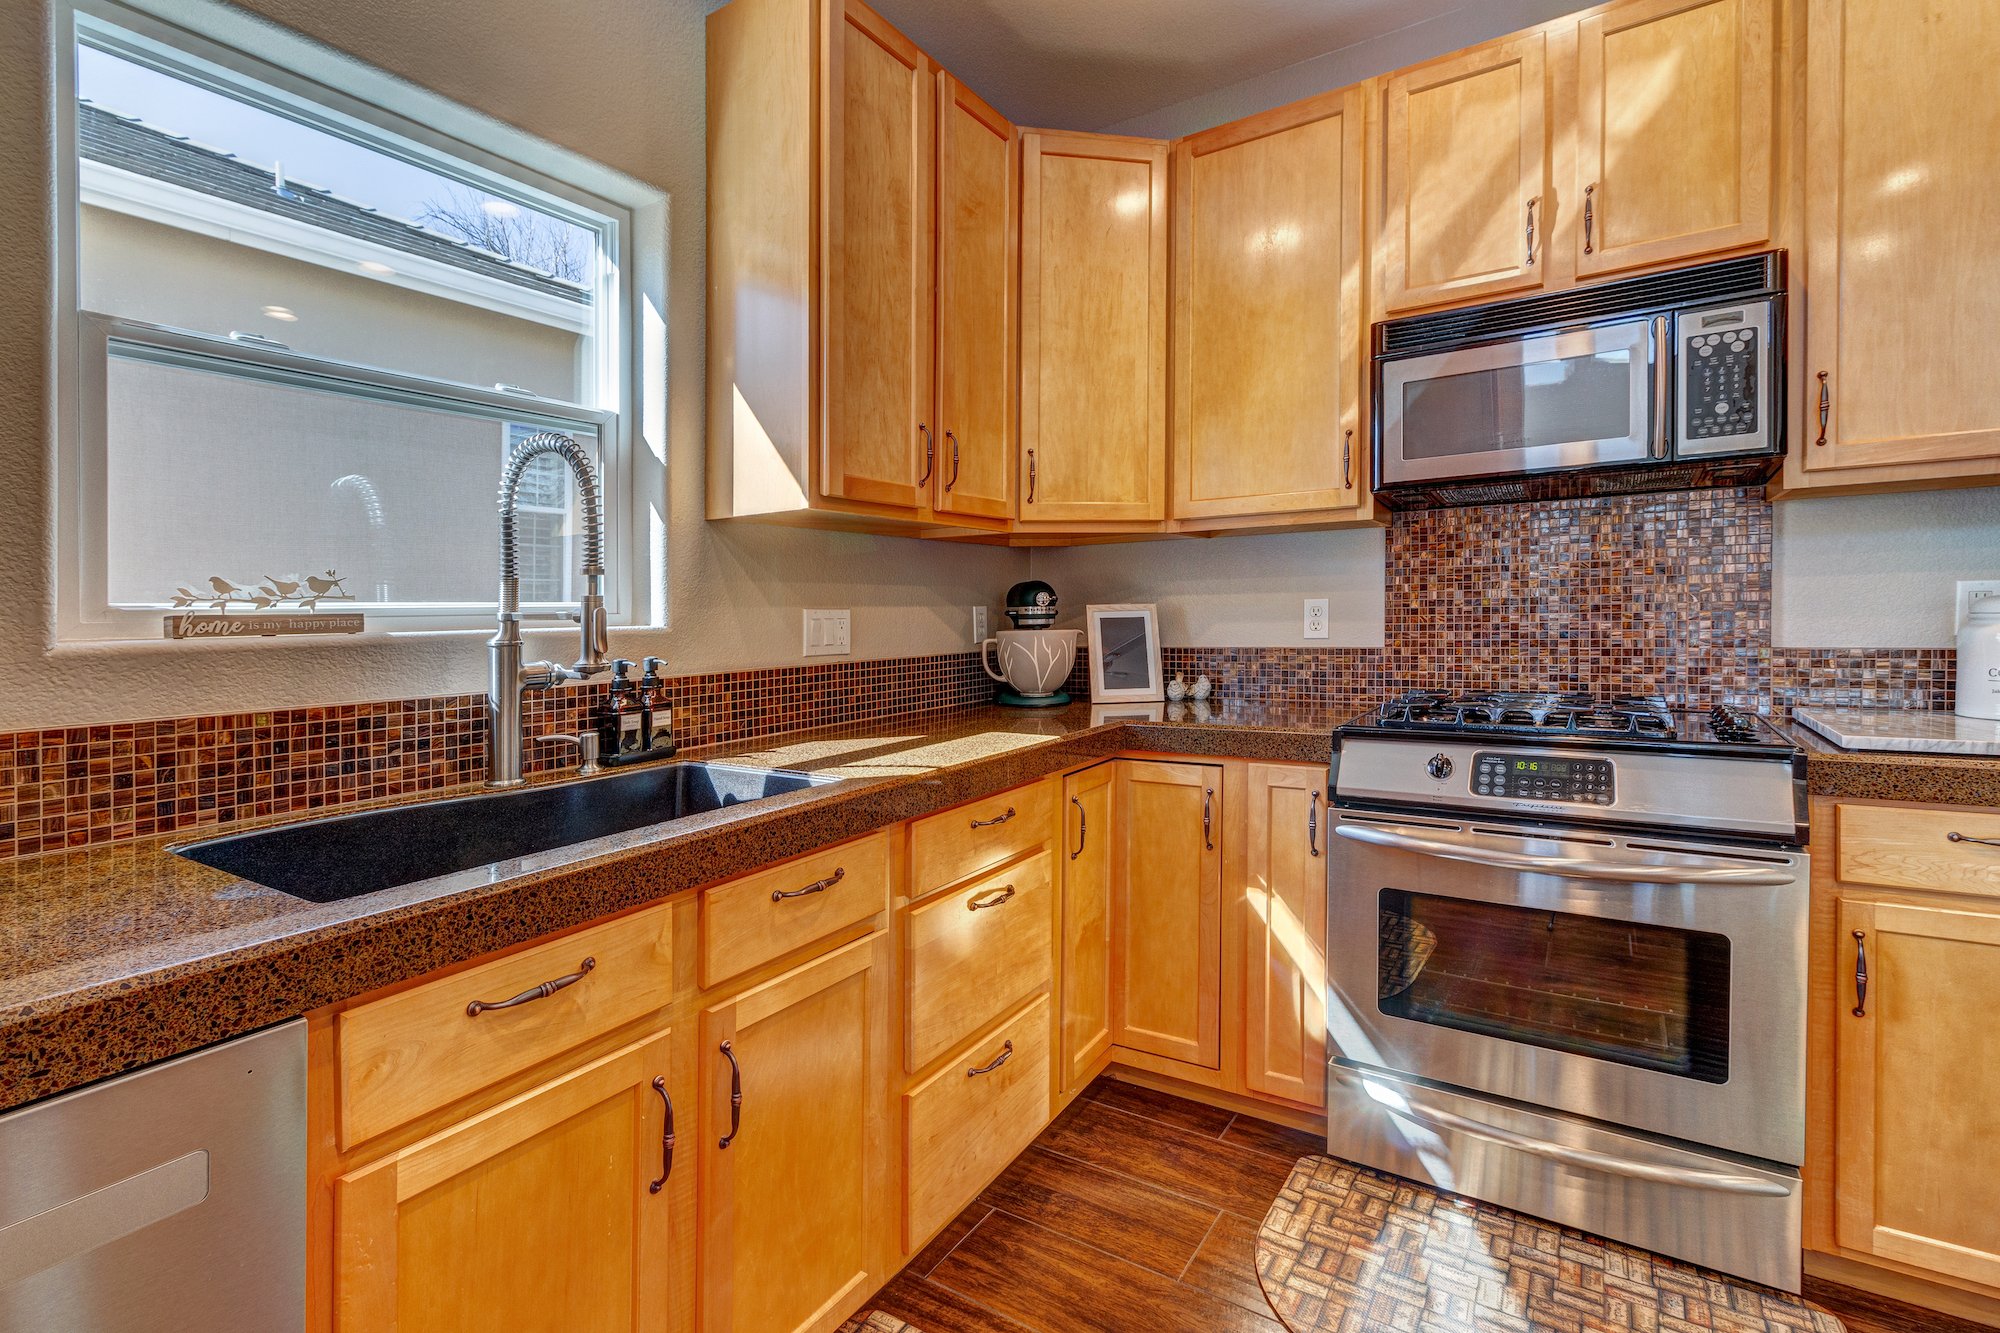 7-Kitchen has stainless appliances to include a stove w gas cooktop.jpg